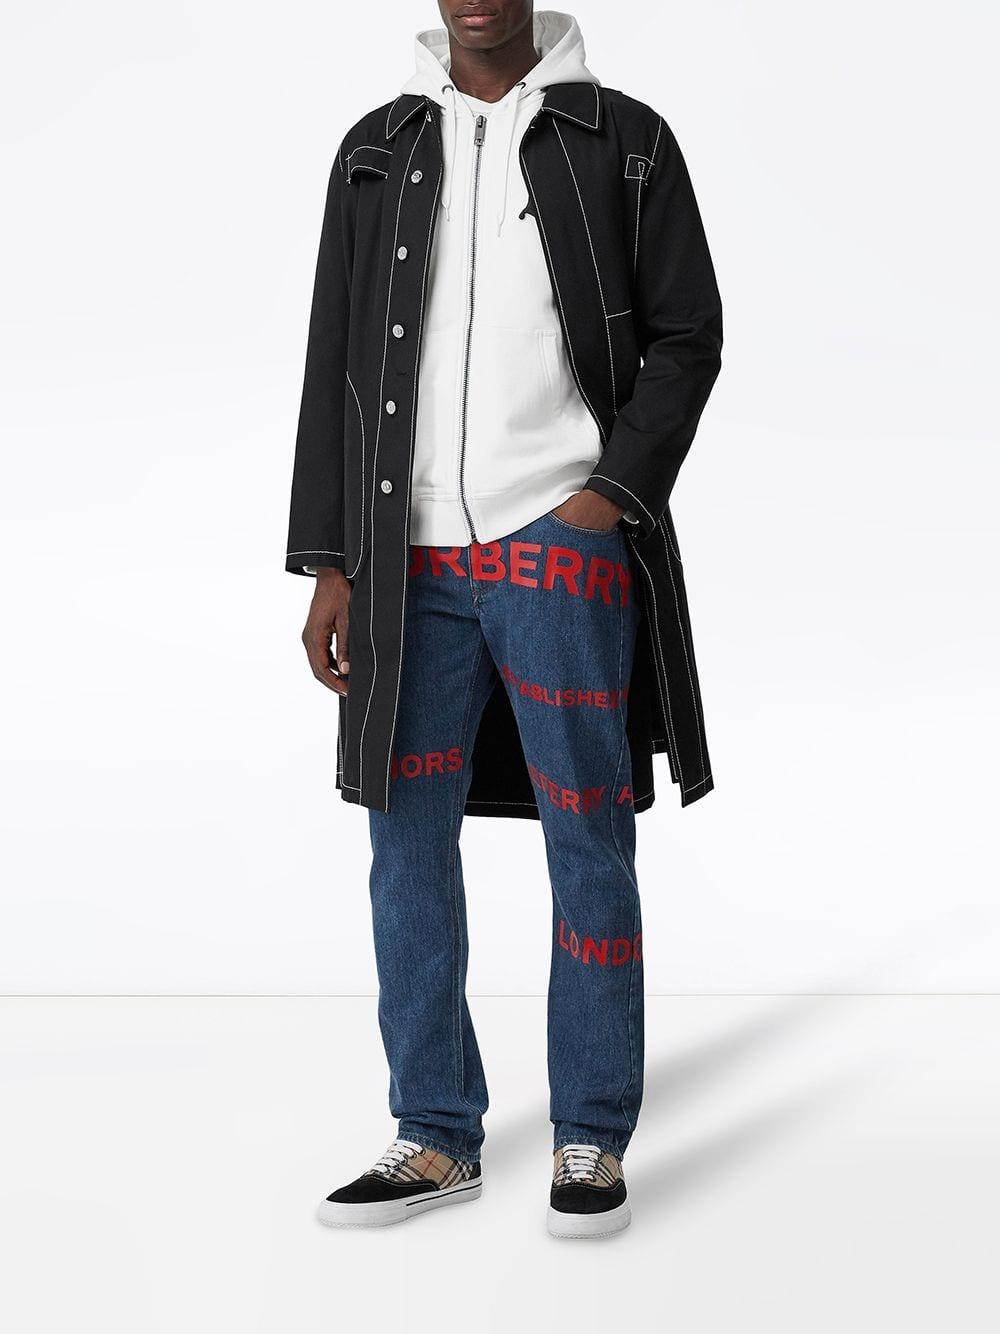 Burberry Straight Fit Horseferry Print Japanese Denim Jeans in Mid 